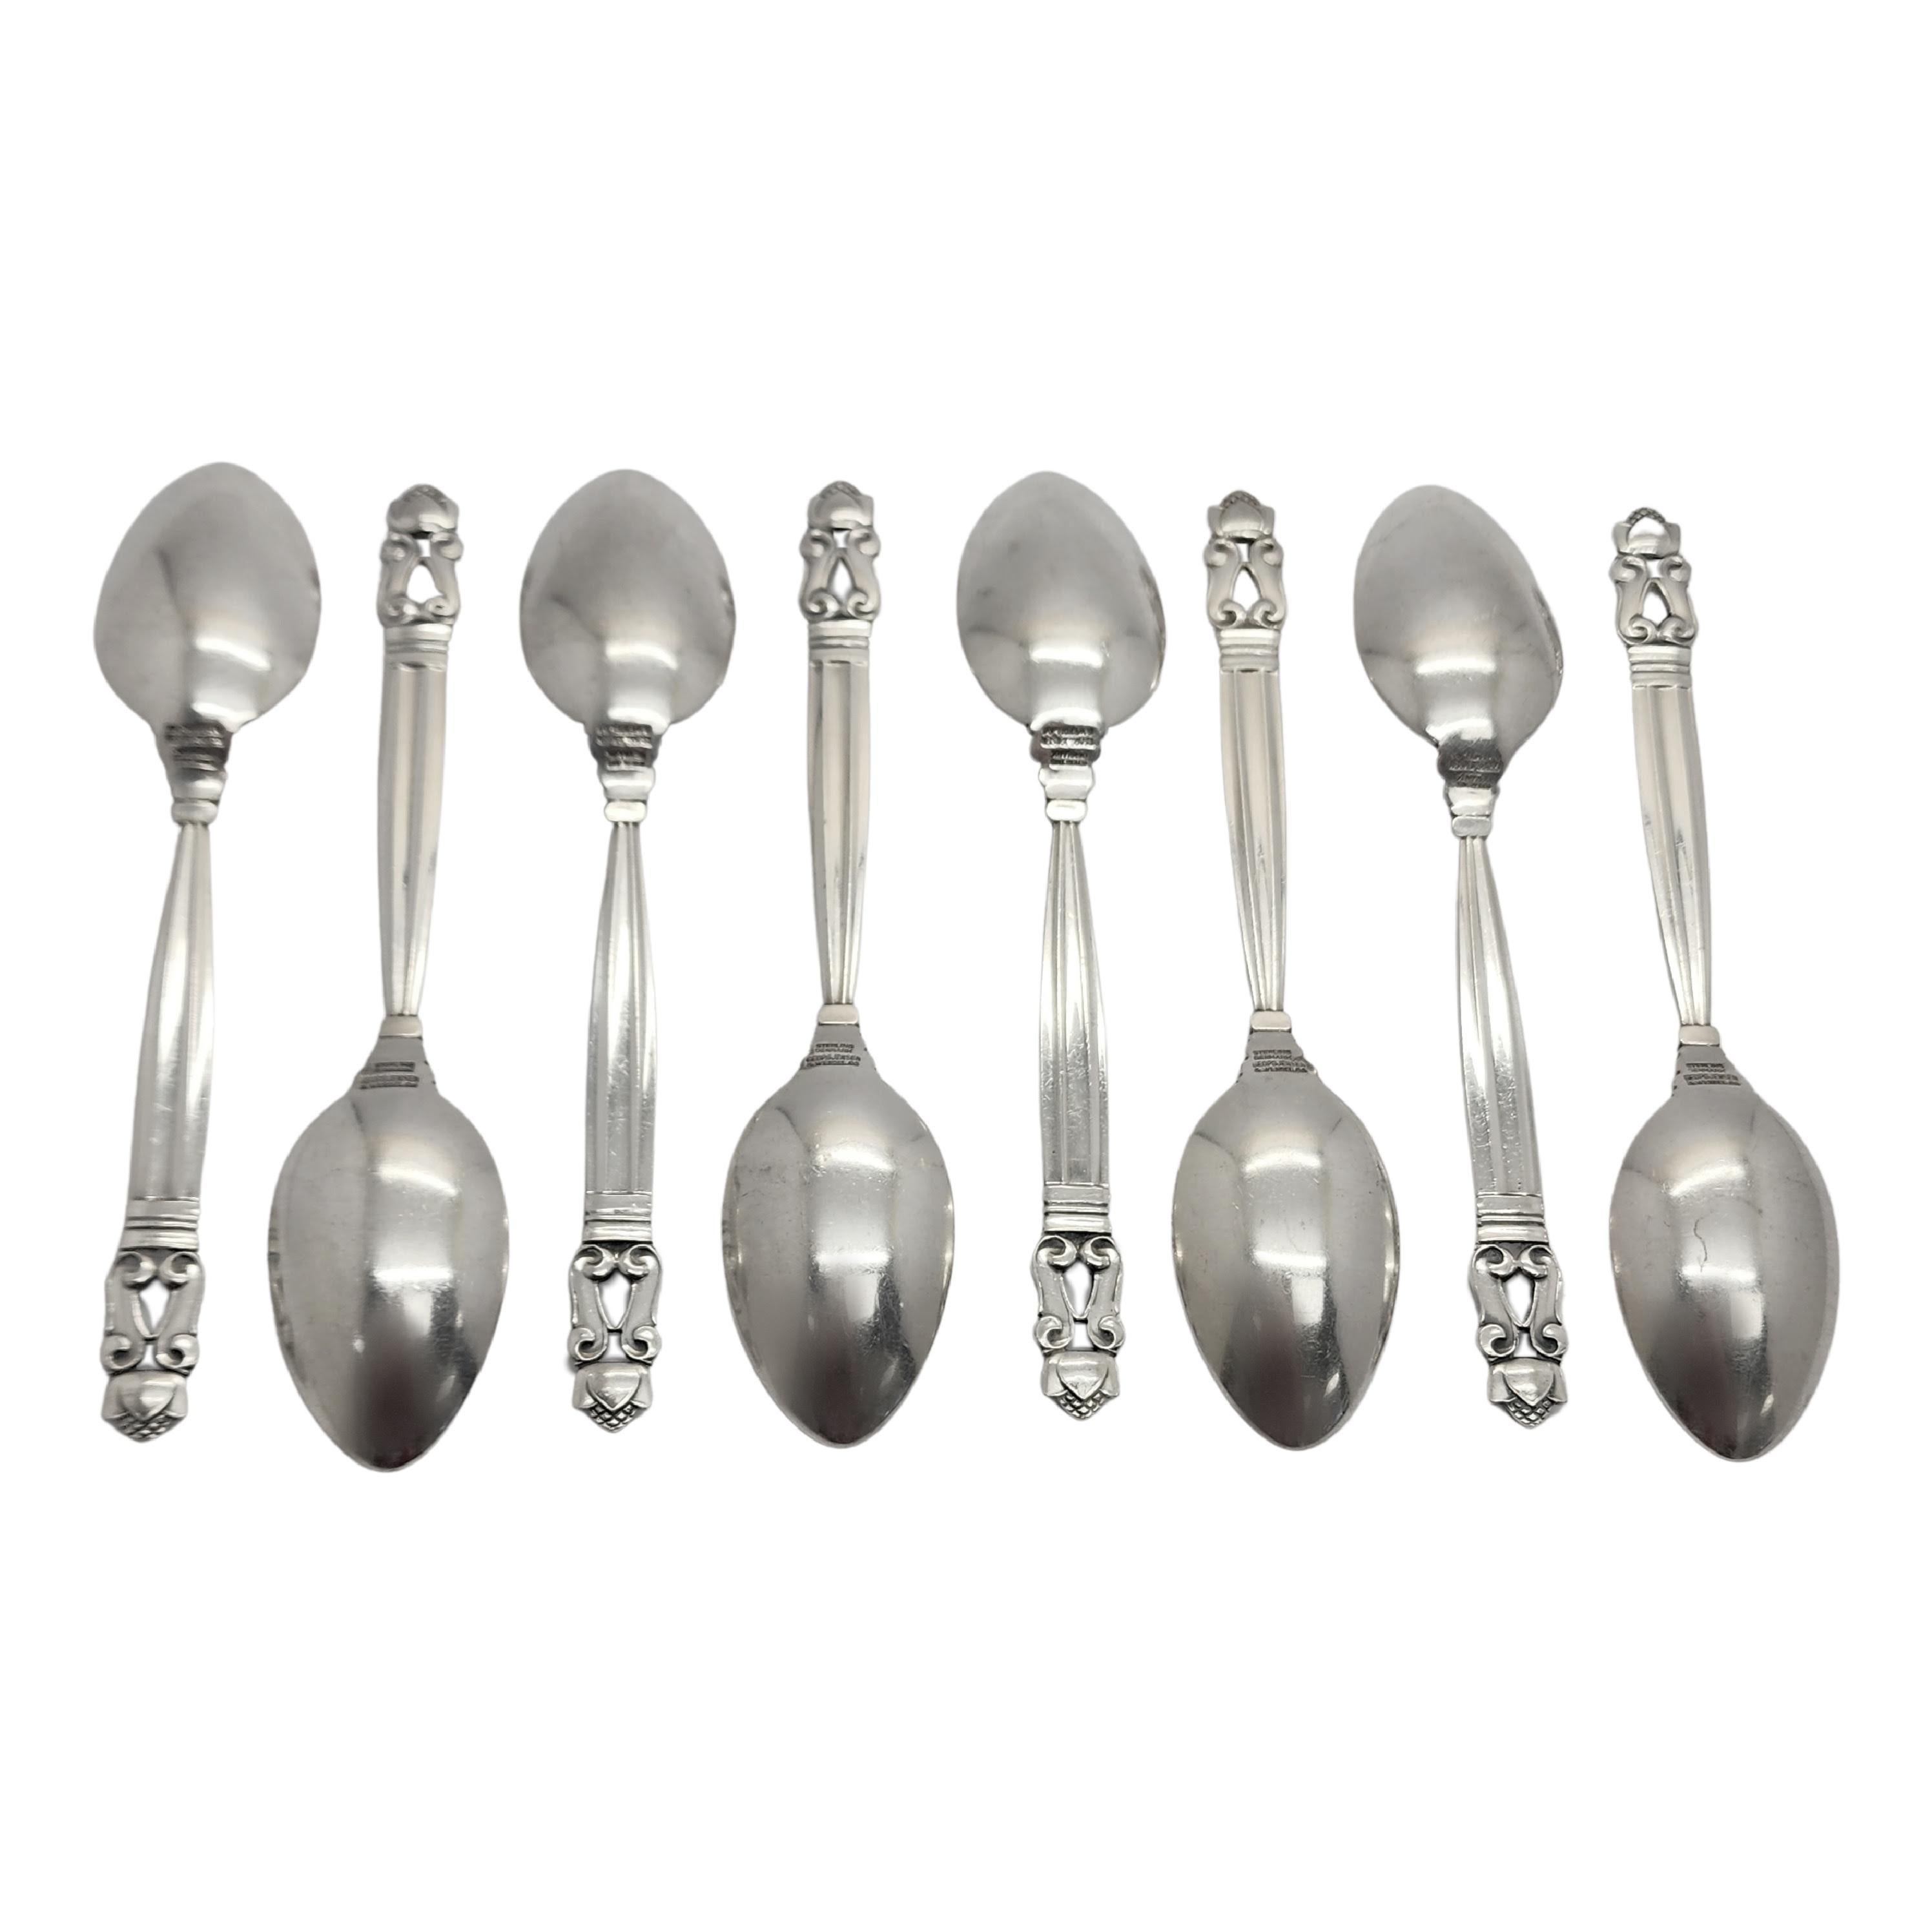 Set of 8 sterling silver teaspoons in the Acorn pattern by Georg Jensen.

The Acorn pattern was introduced in 1915 as a collaboration between Georg Jensen and designer Johan Ronde. The Acorn pattern, which combines Art Nouveau and Art Deco styles,